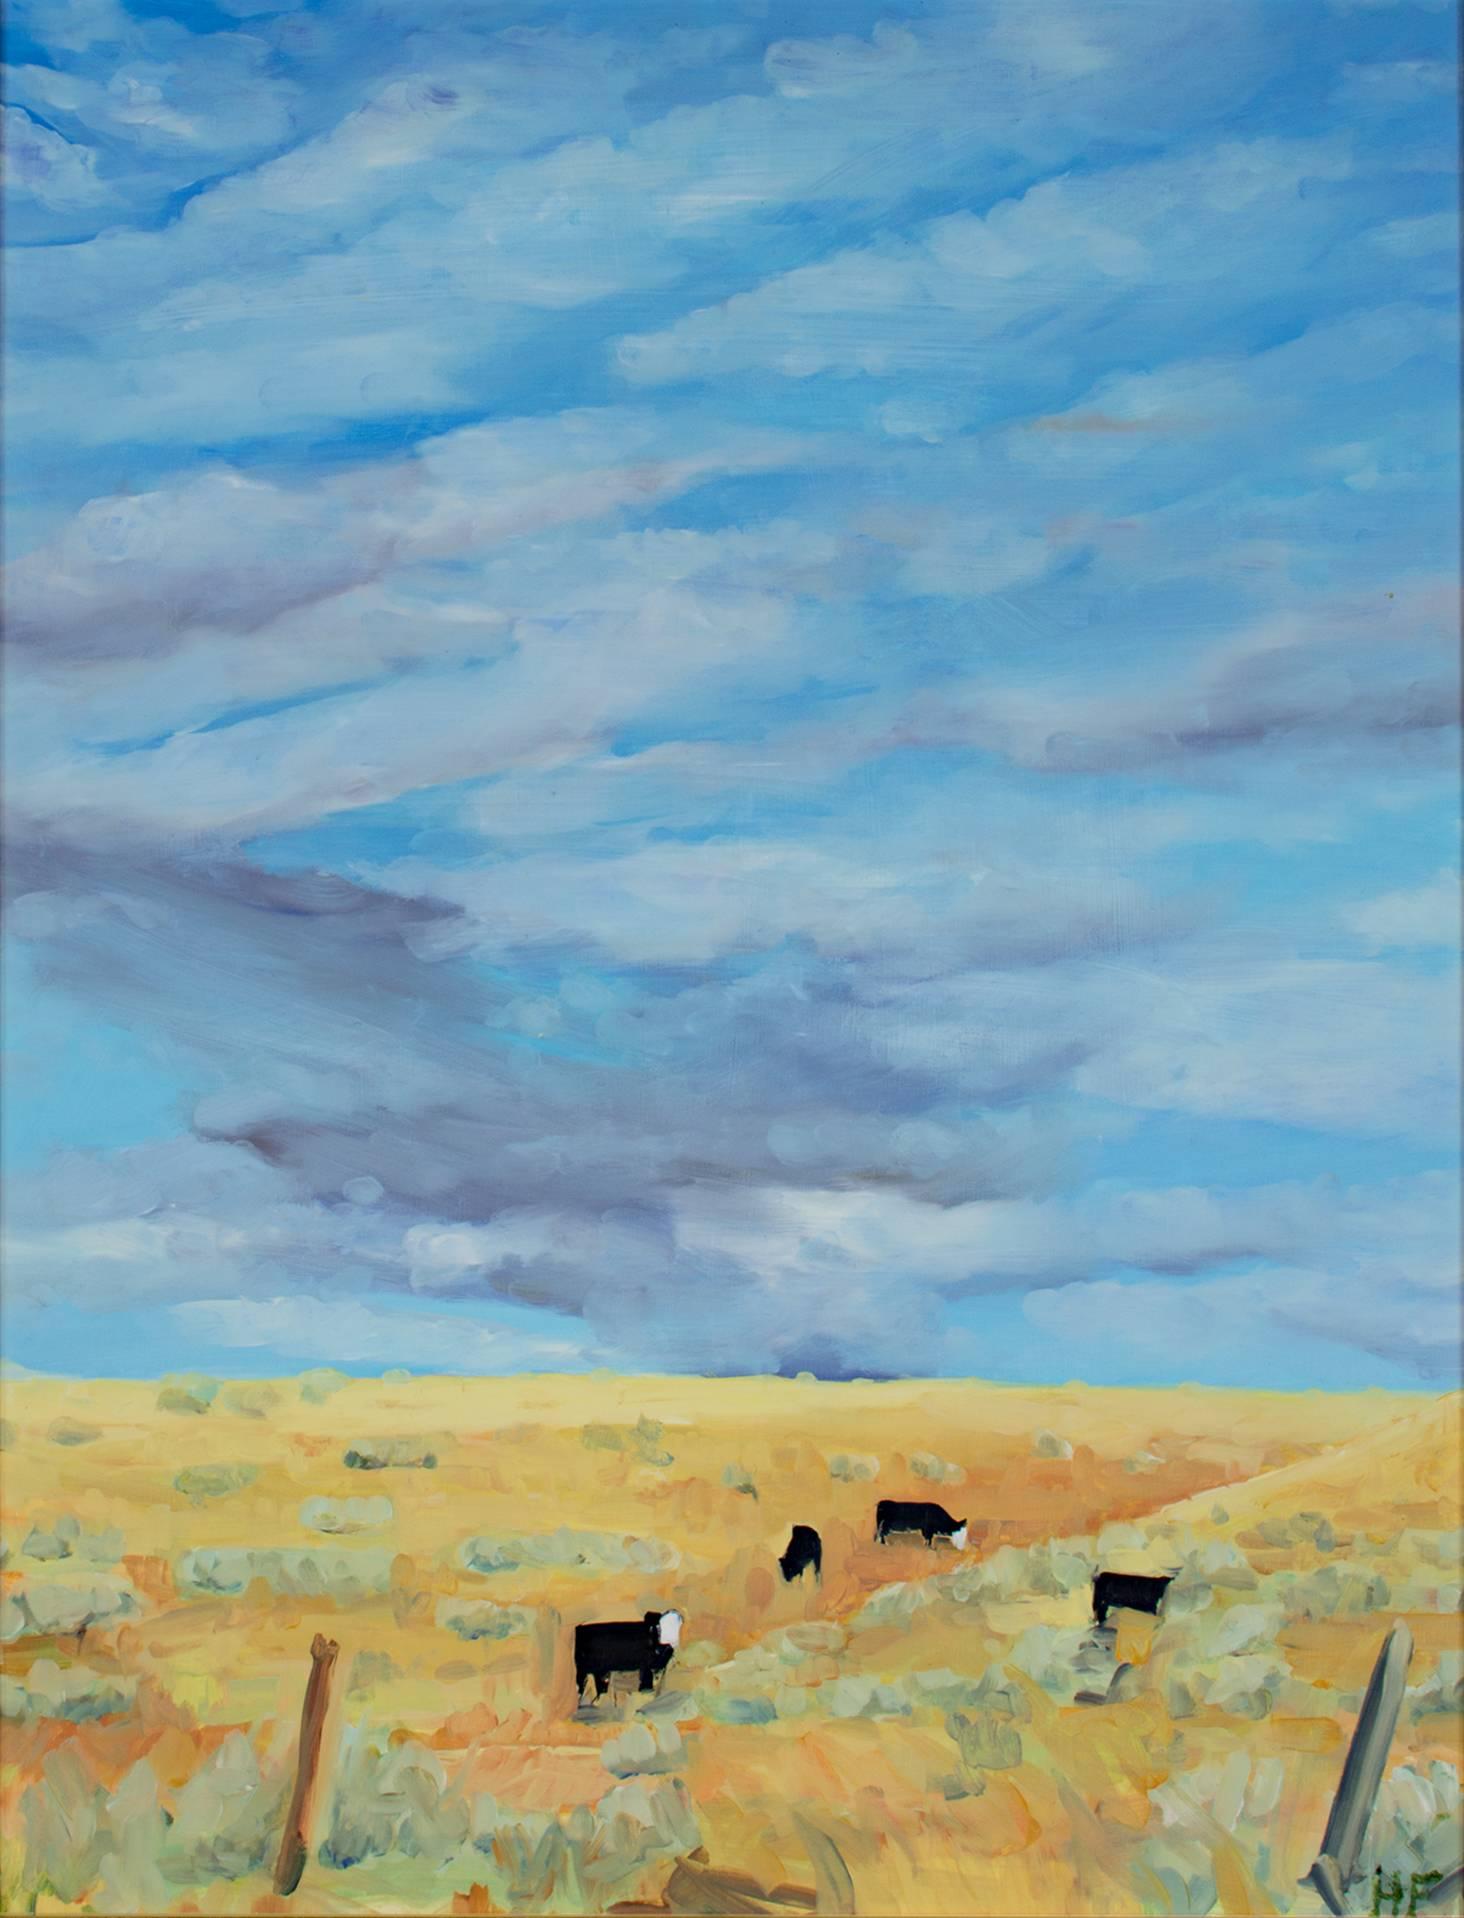 "Ucross Sky" is an original oil painting on masonite board. It is initialed by the artist Heather Foster in the lower right corner. It depicts four black cows in a field of yellow underneath a bright blue and slightly cloudy sky.

24 1/8" x 18"